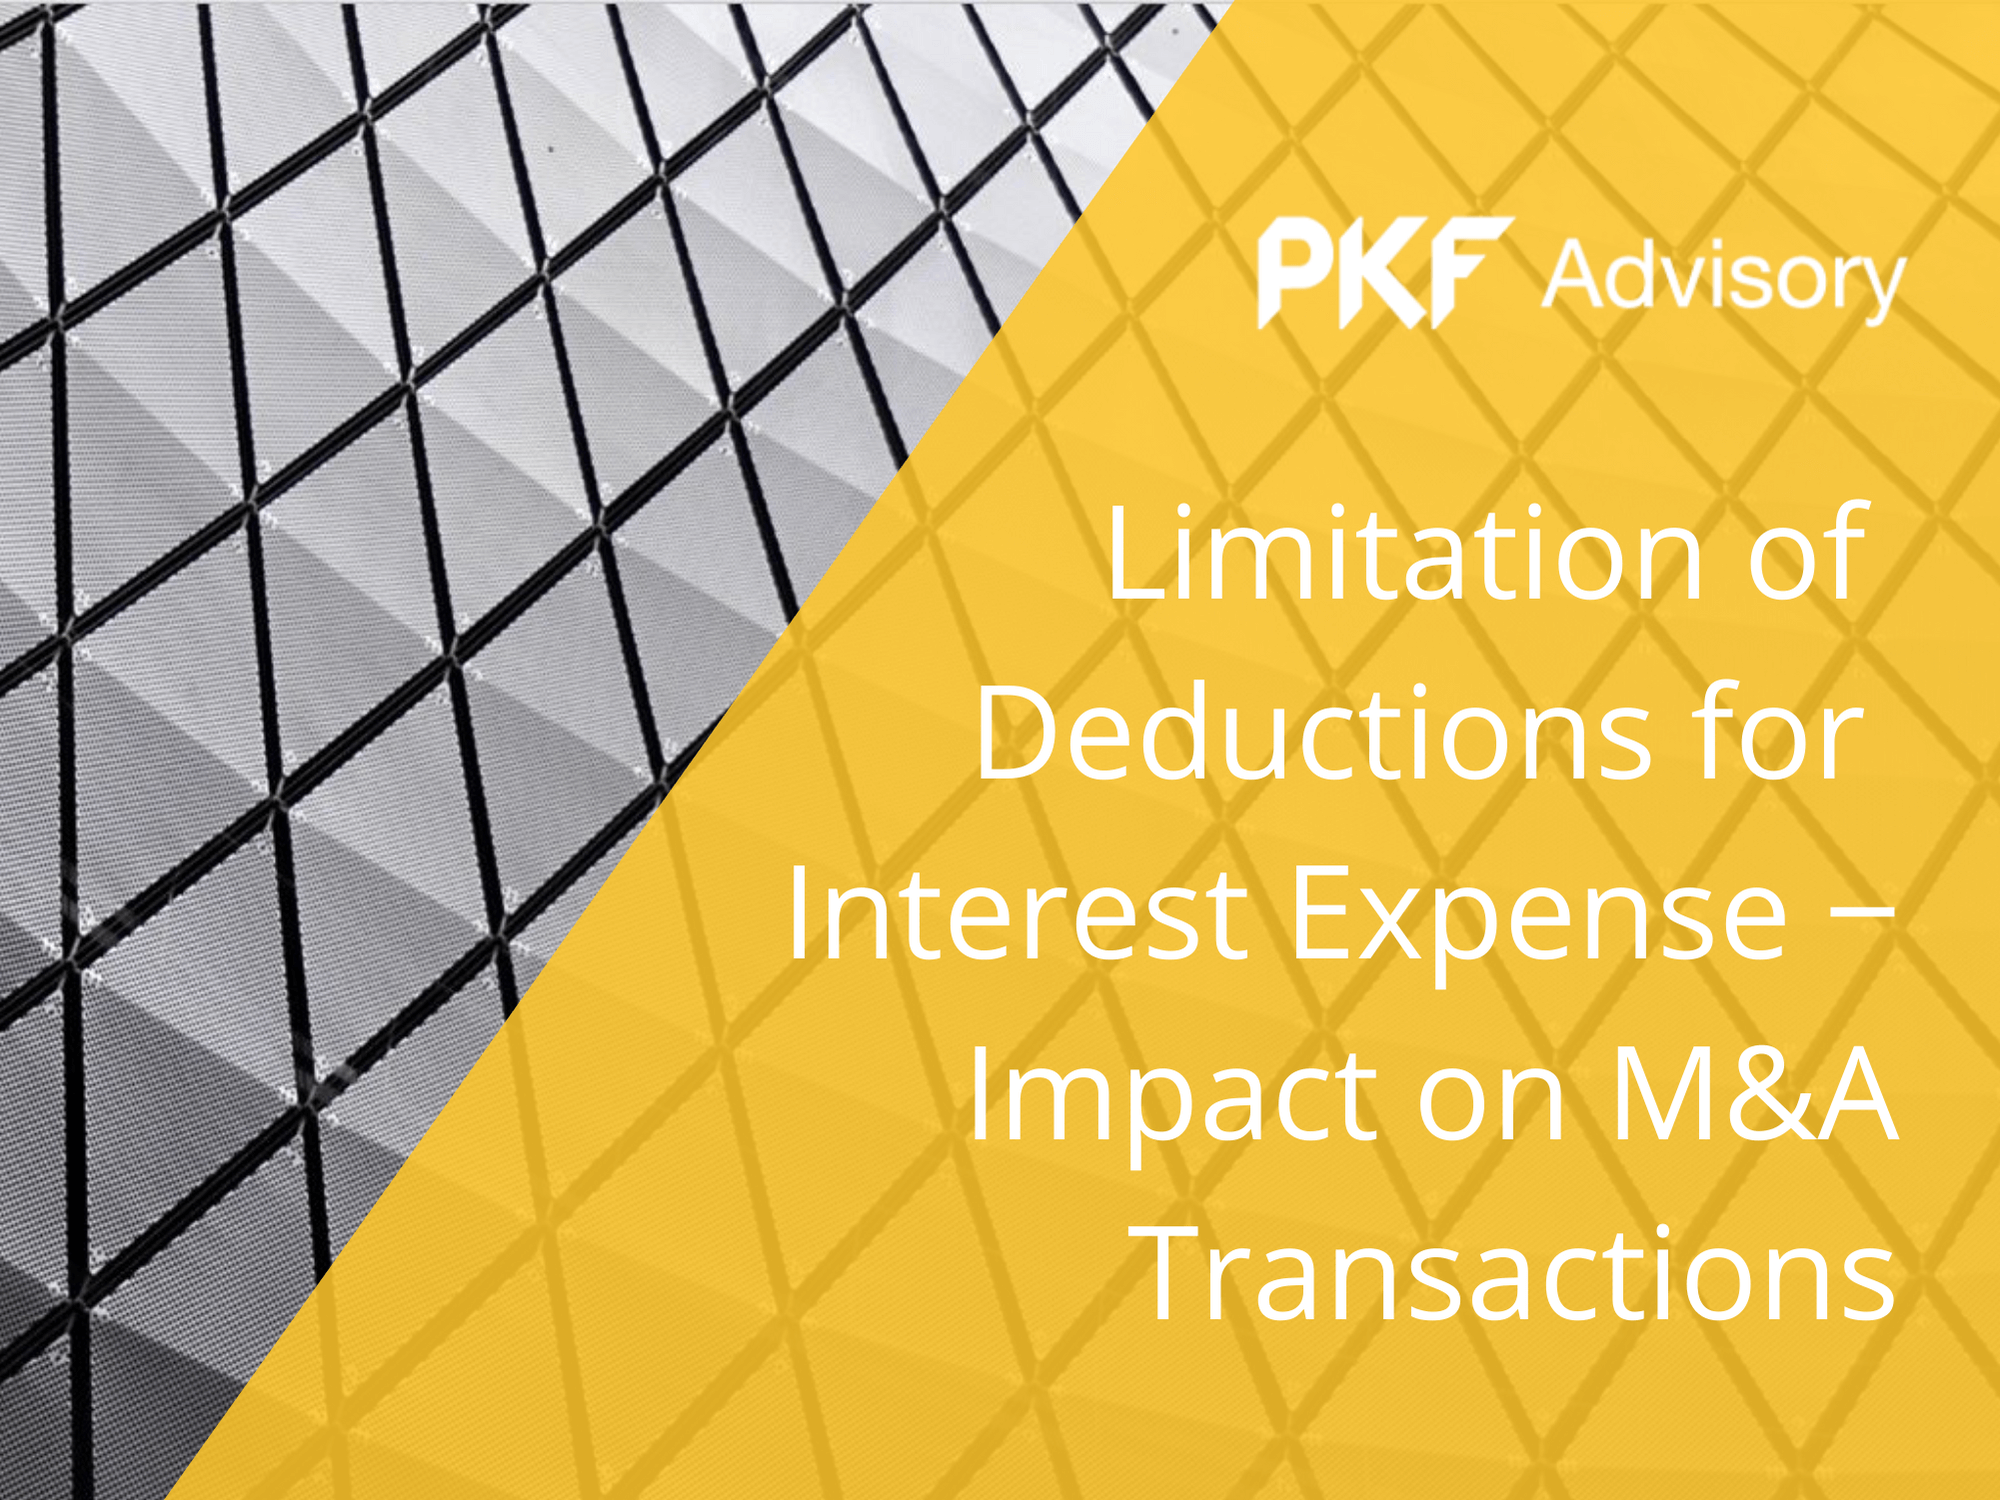 Limitation of Deductions for Interest Expense ‒ Impact on M&A Transactions